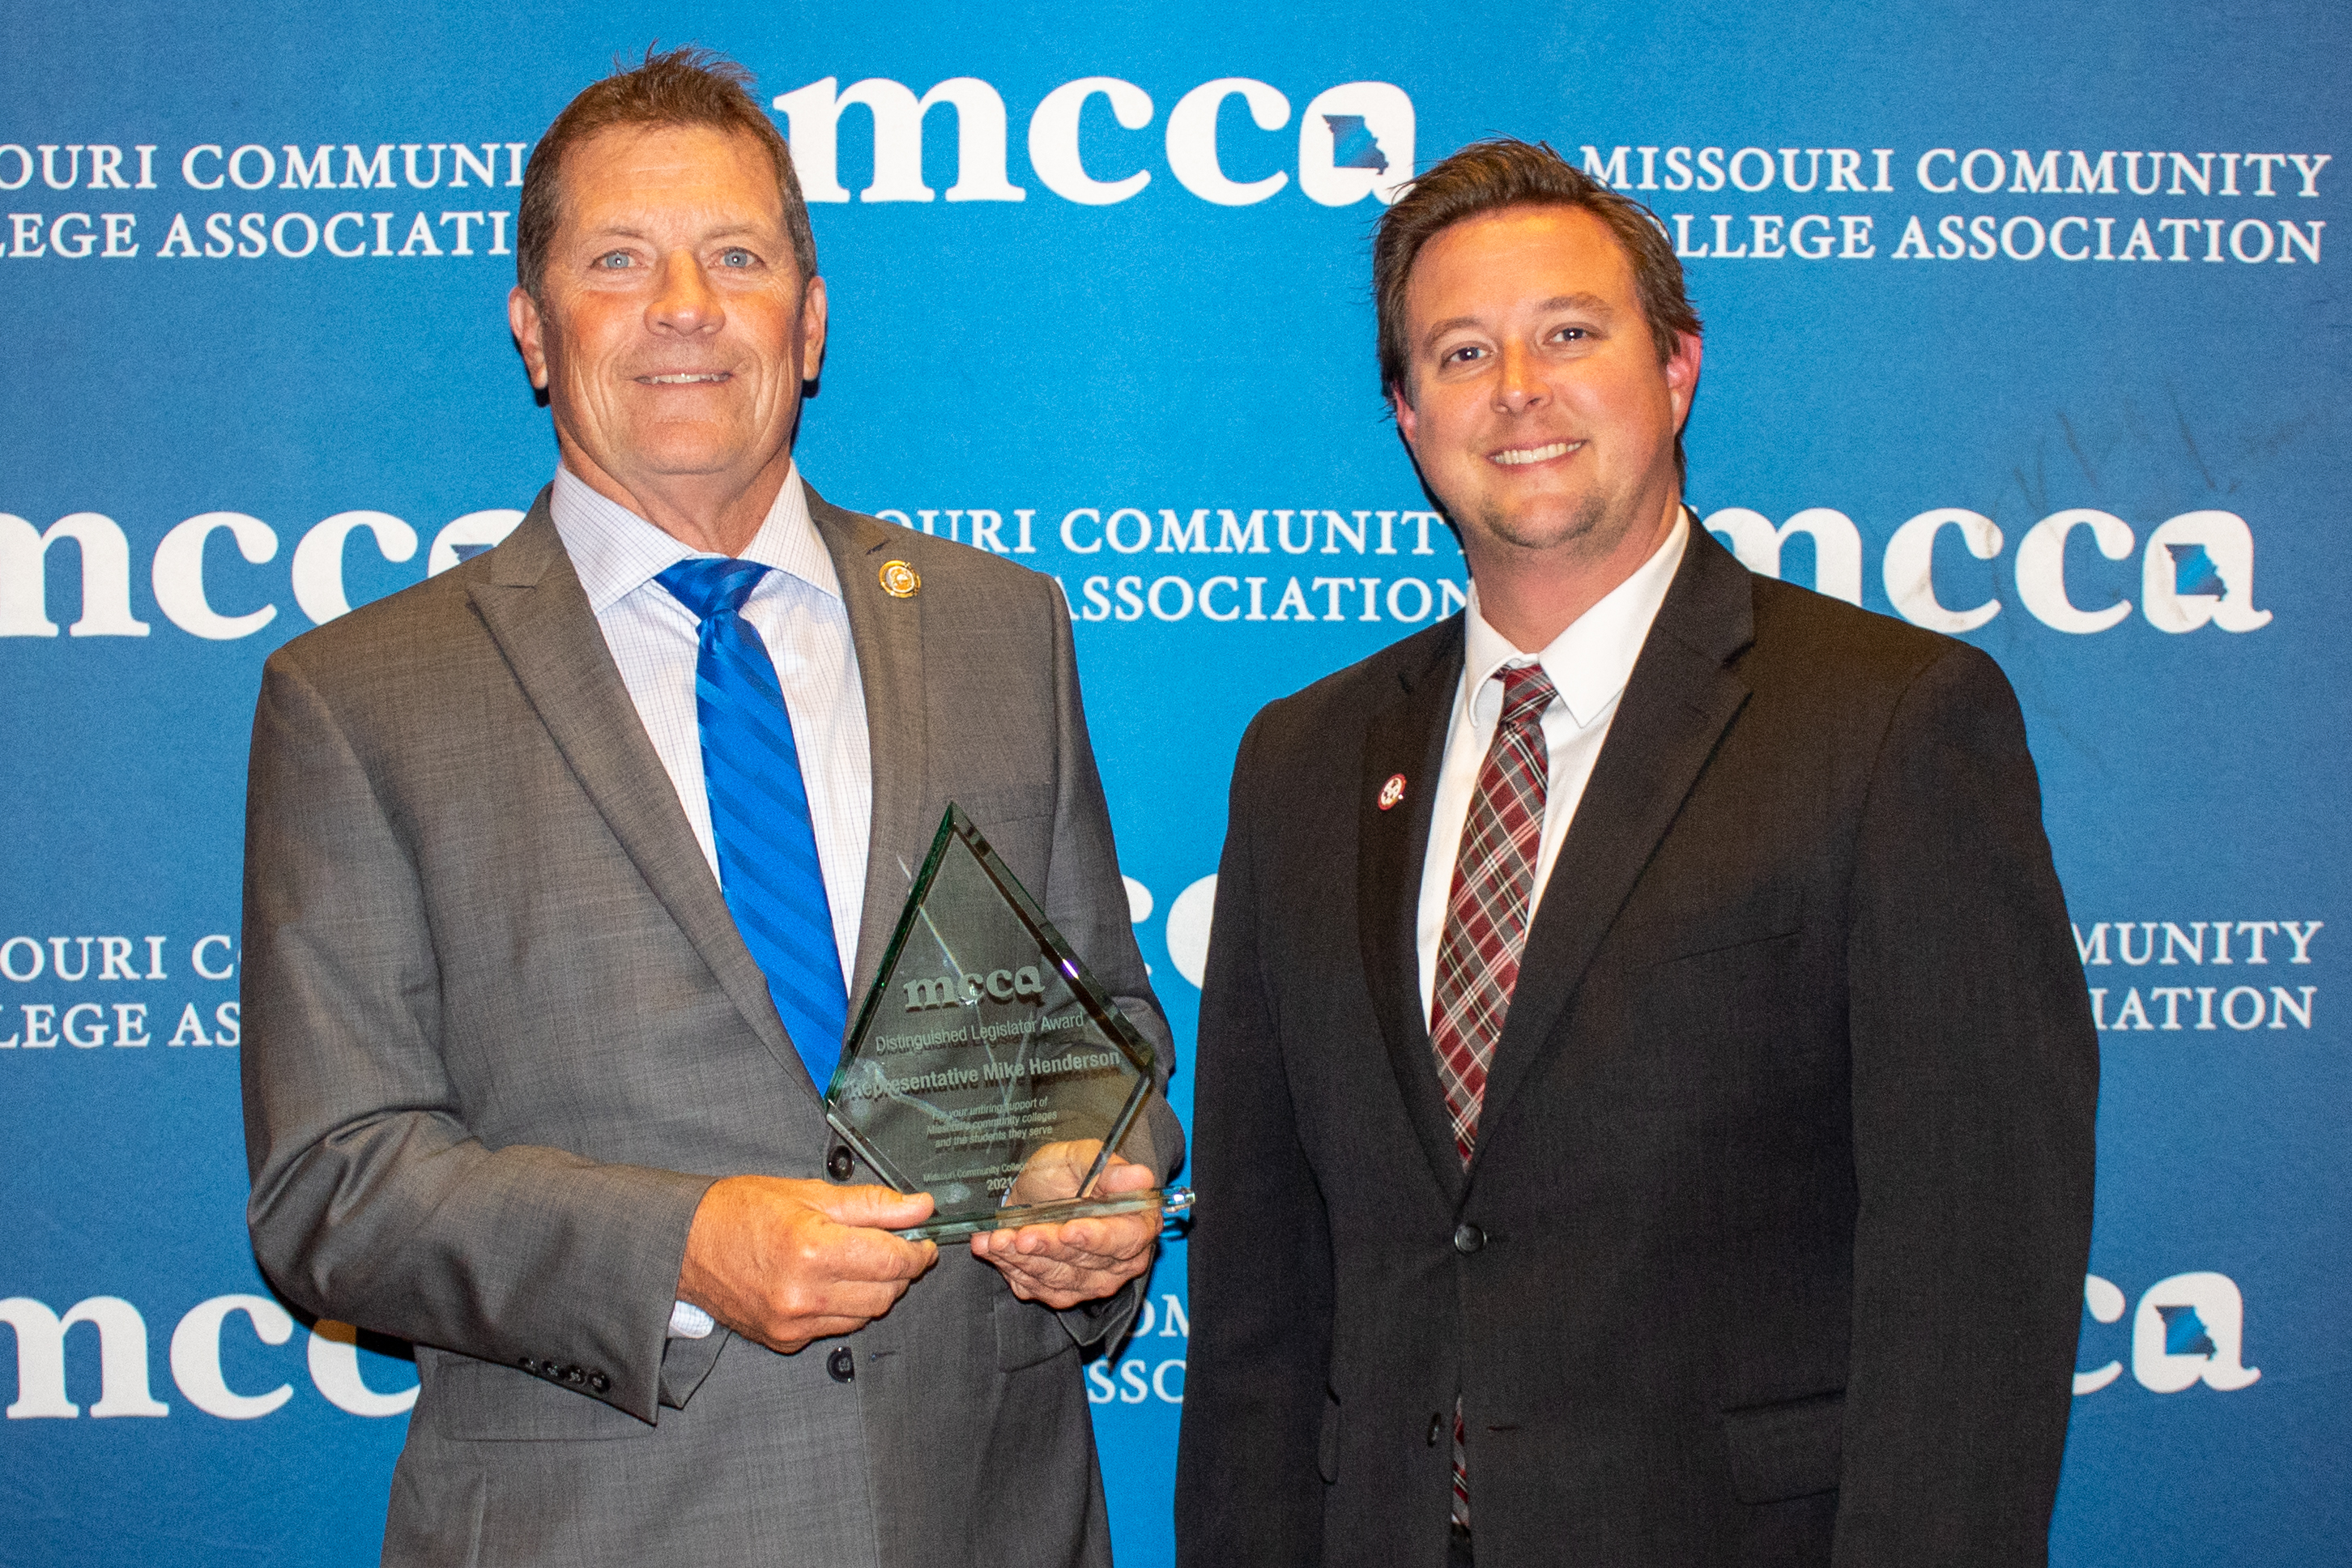 Image of Dr. Gilgour with Mr. Henderson accepting an award.